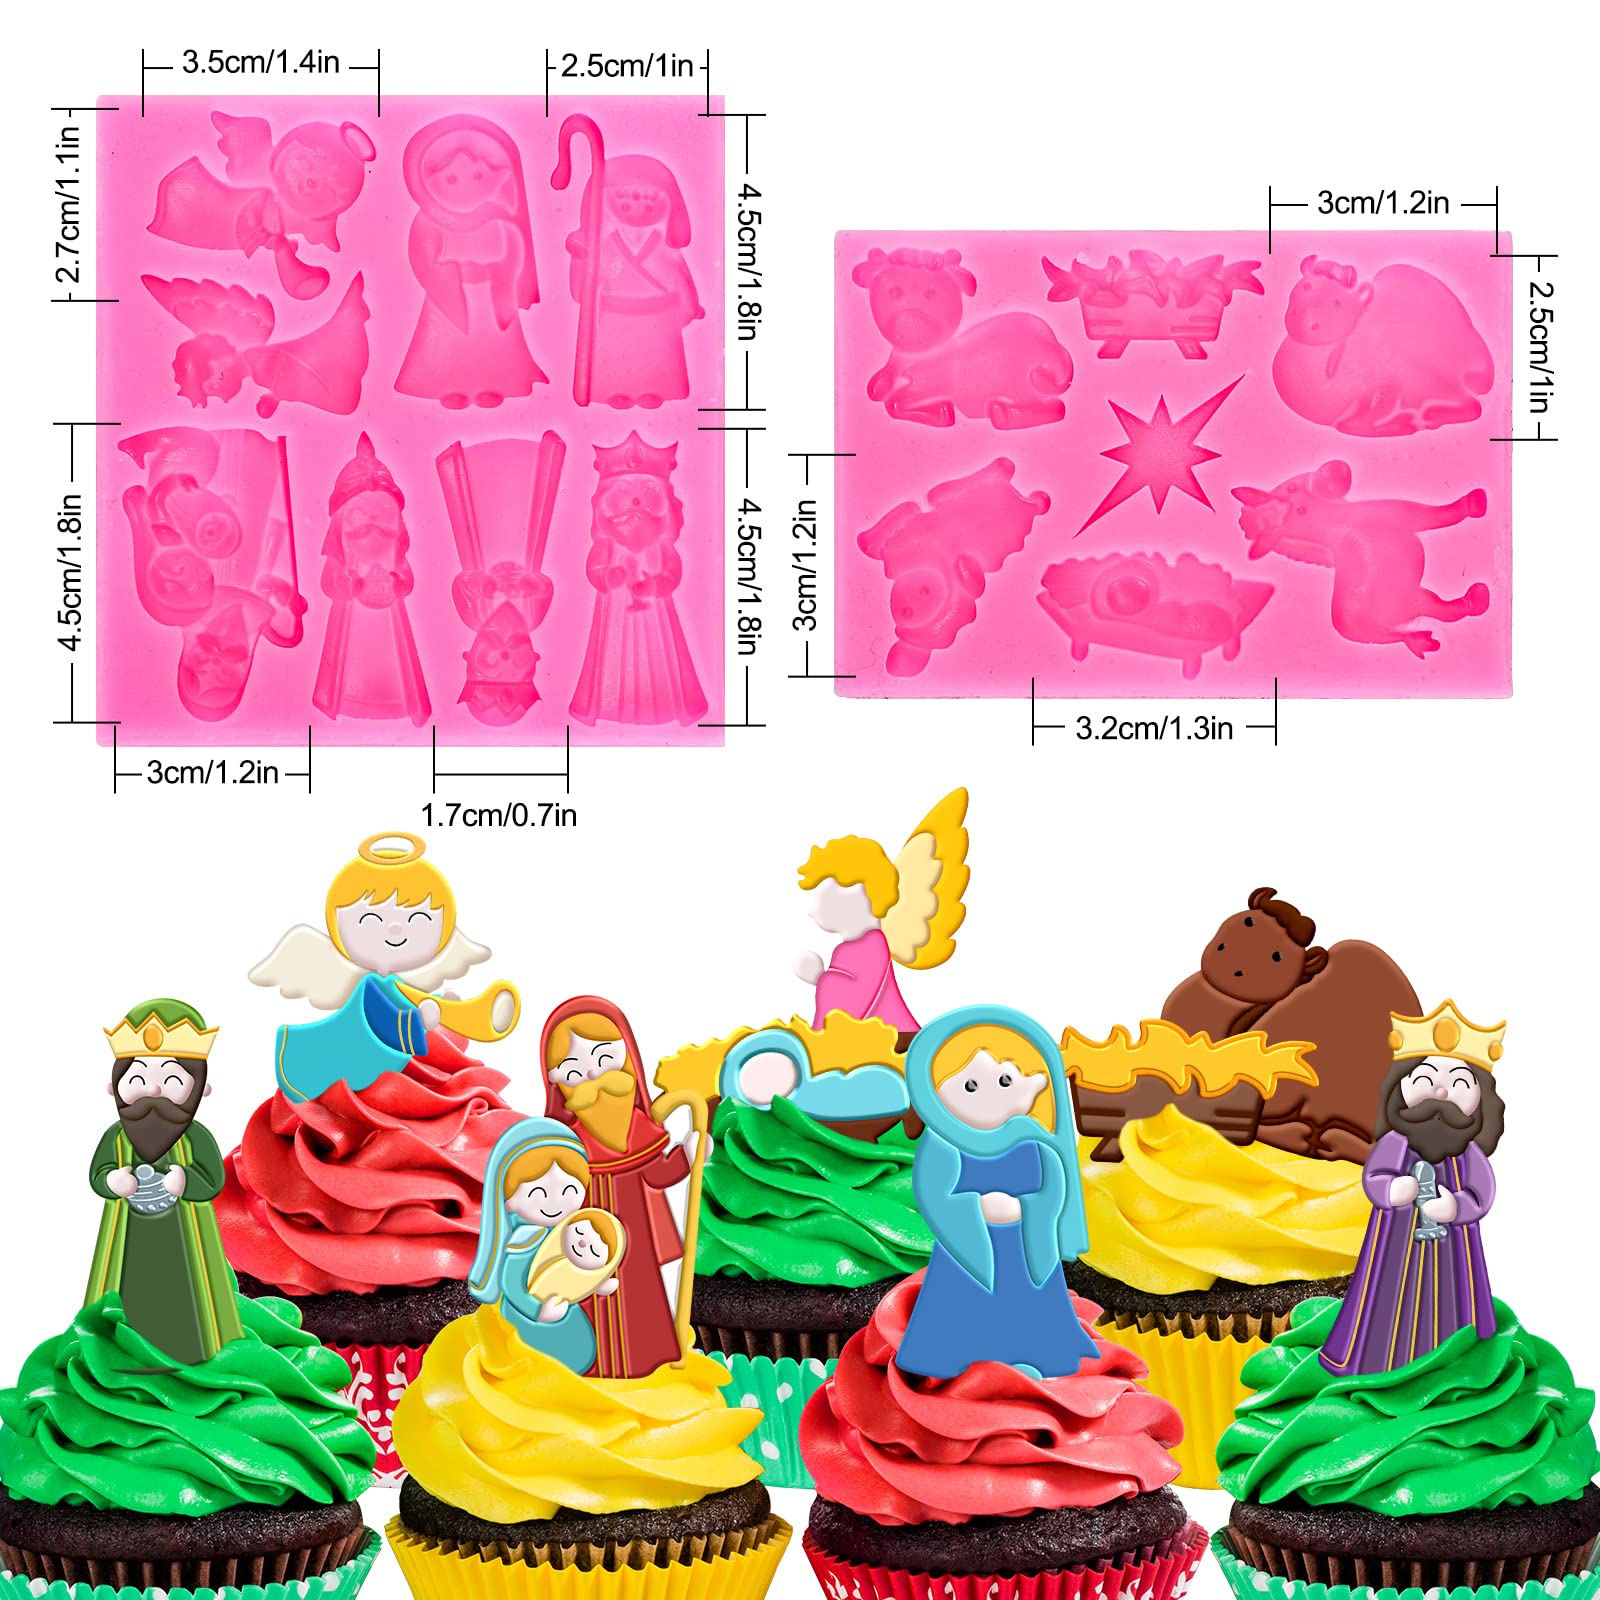 Whaline 2Pcs Christmas Fondant Molds Nativity Silicone Moulds Night of Birth Resin Baking Molds Jesus' Birth Theme Cake Decorating Molds for Xmas Handmade DIY Candy Chocolate Cookie Sugarcraft